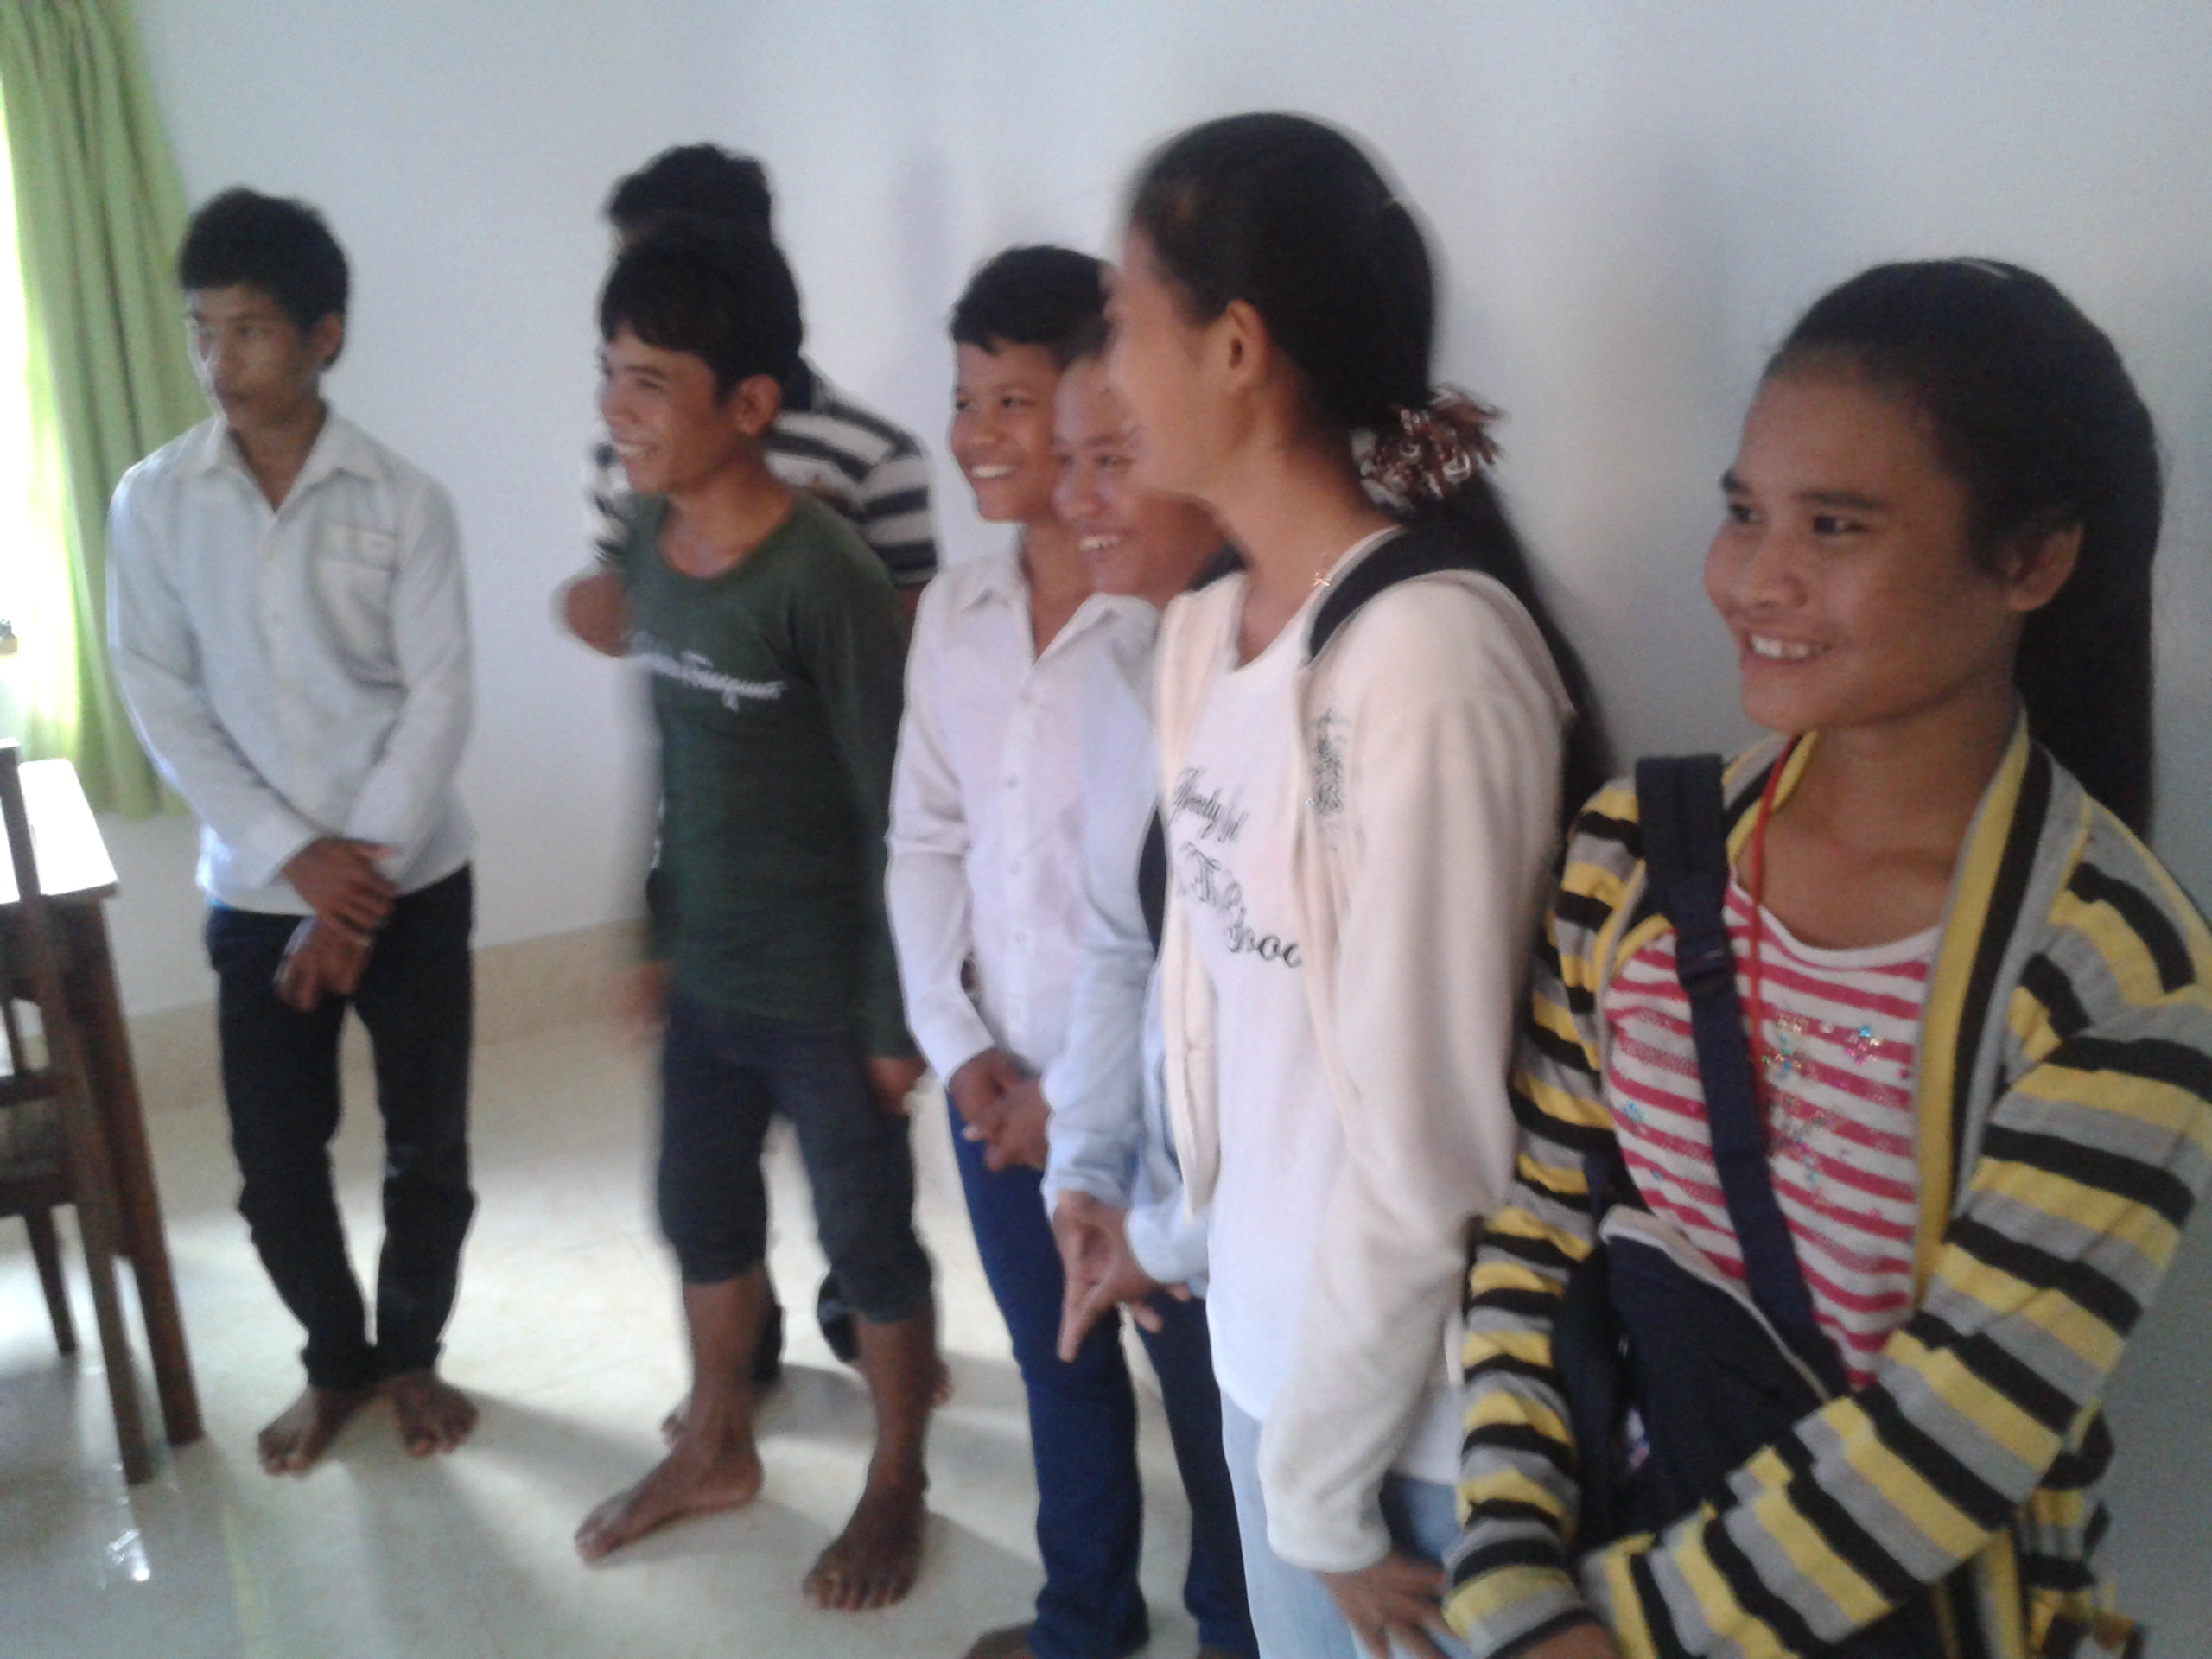 Sreymao with her new student peers at their new house in Siem Reap.